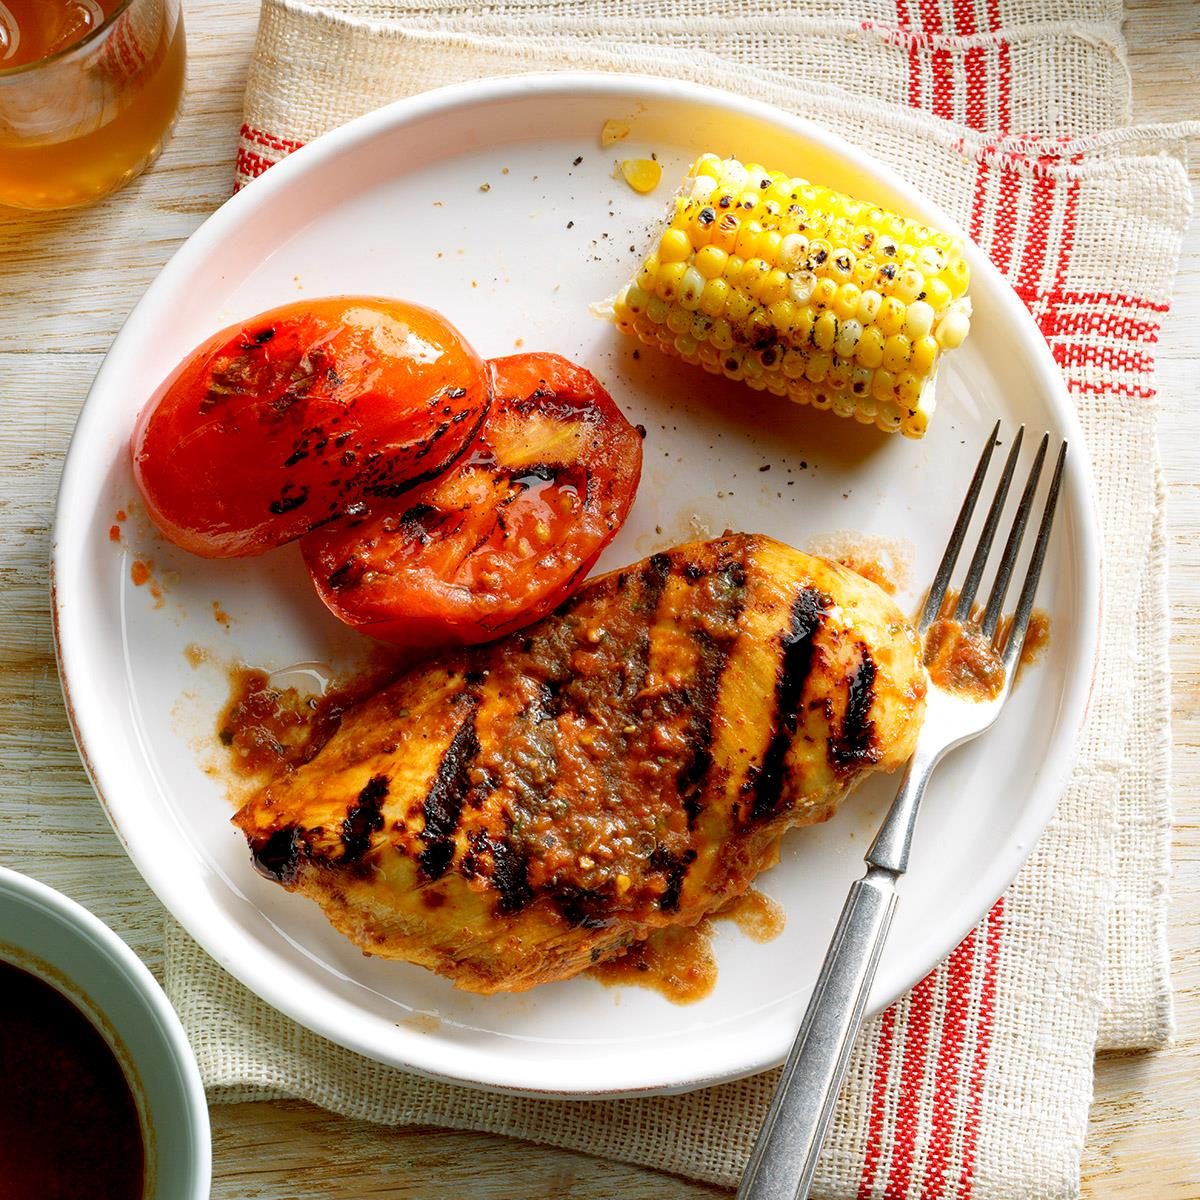 https://www.tasteofhome.com/wp-content/uploads/2018/01/Grilled-Basil-Chicken-and-Tomatoes_EXPS_DSBZ17_37304_B01_19_5b-2.jpg?fit=700%2C1024